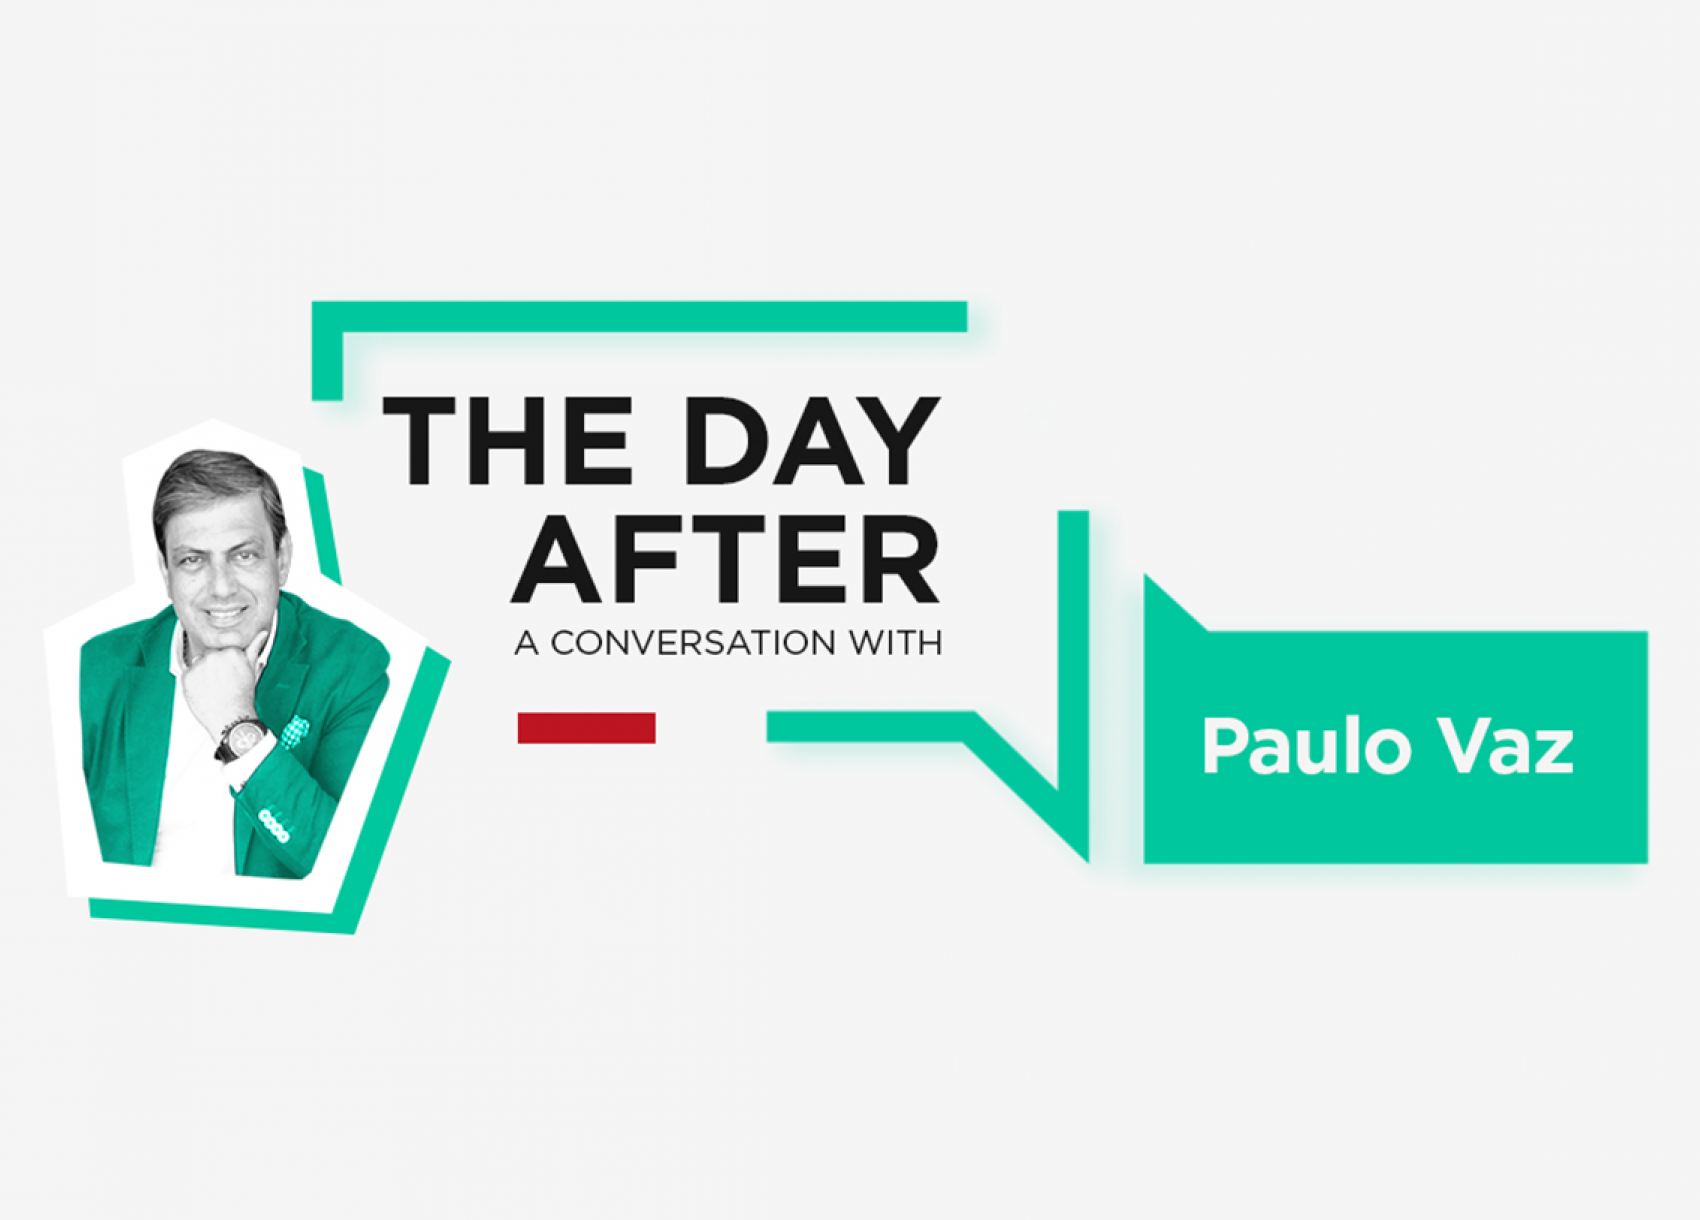 The day after Paulo Vaz 